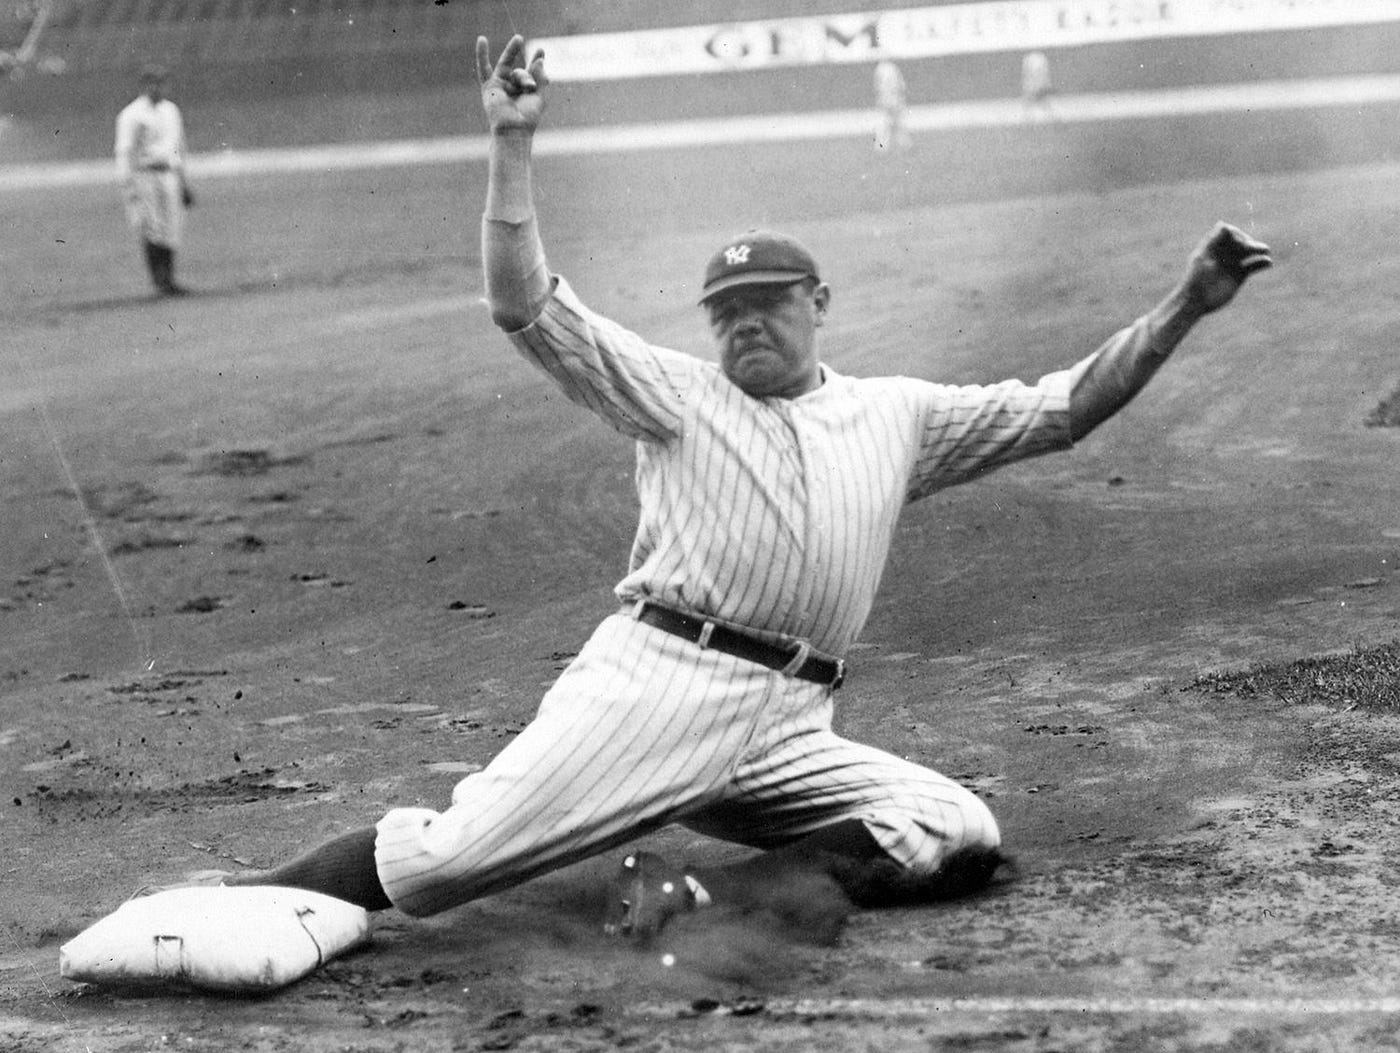 The MLB Star Who Thought Babe Ruth Was Bad for Baseball, by Andrew Martin, SportsRaid